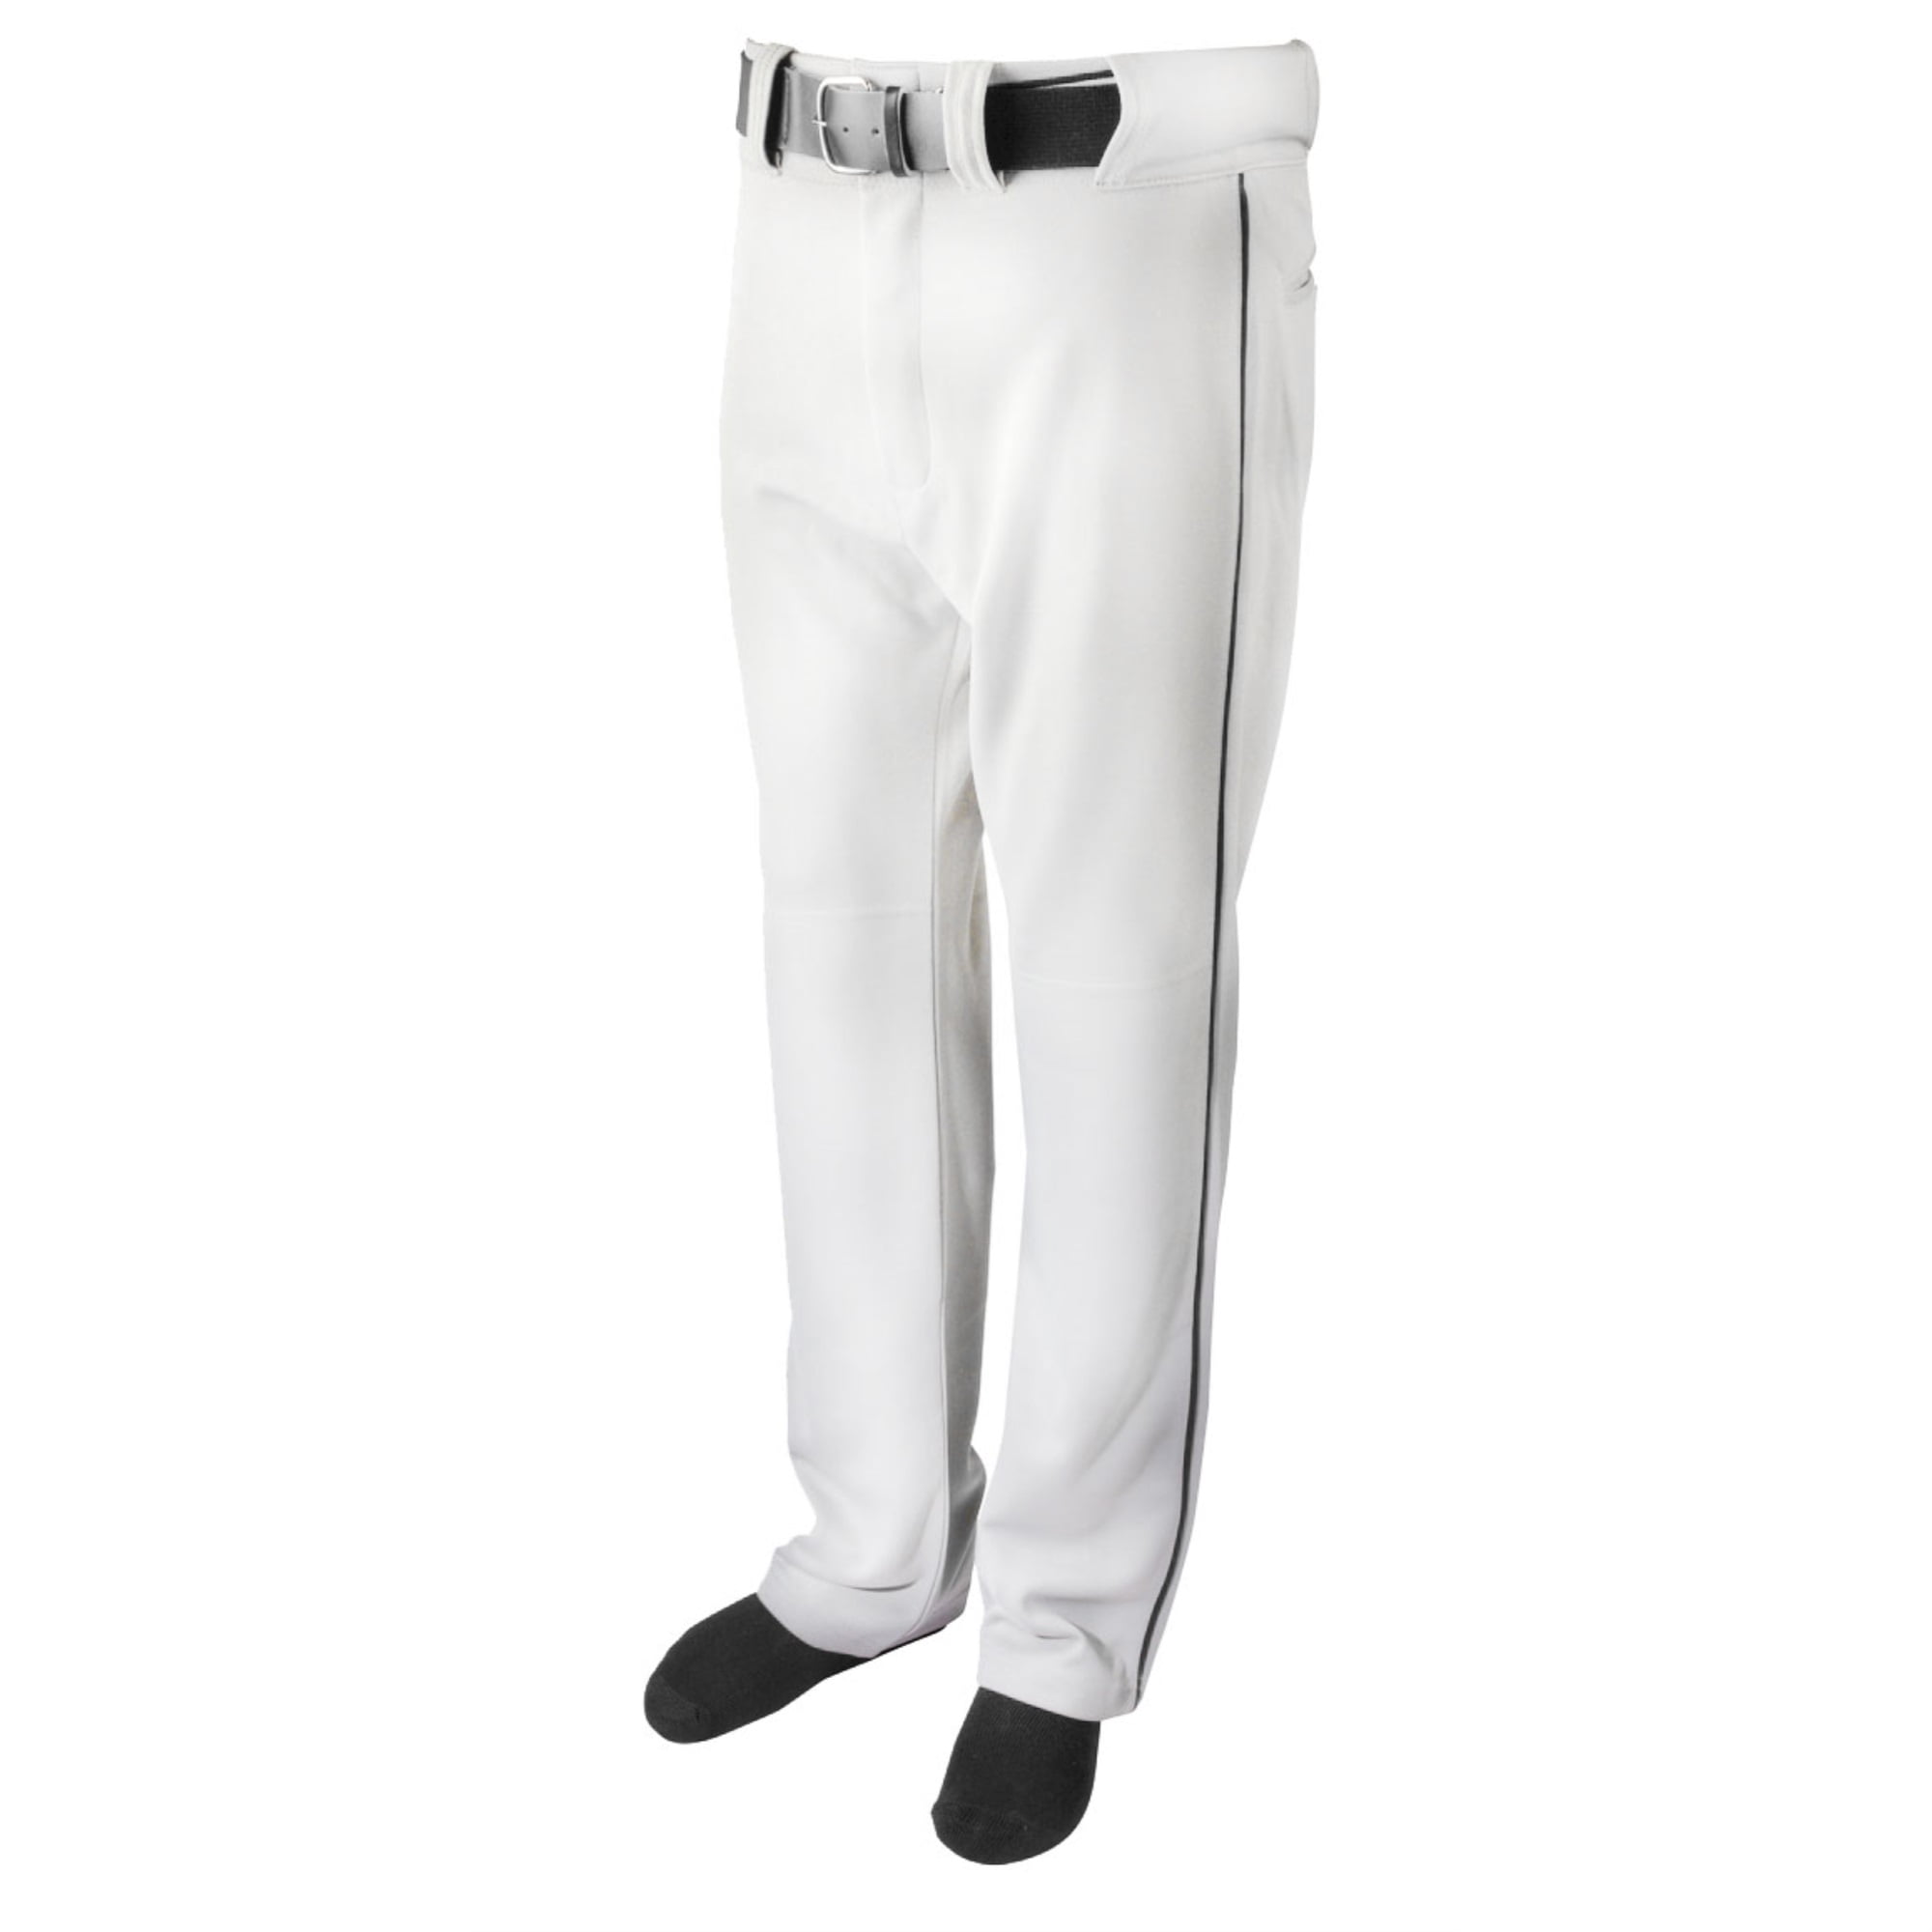 NEW Combat Adult Piped & Trimmed Stock Open Bottom Pro Baseball Softball Pants 